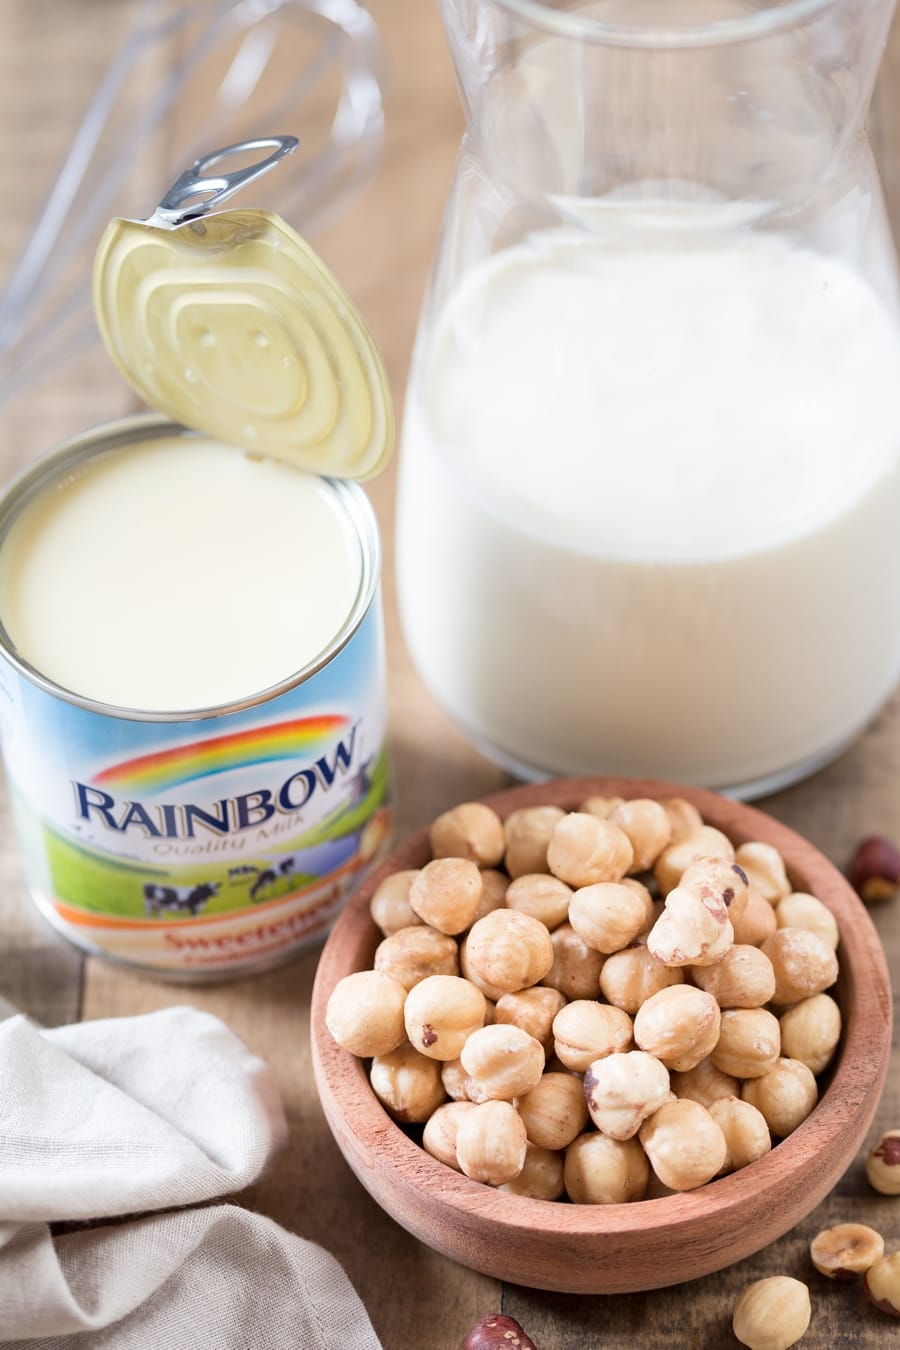 Toasted hazelnuts in a bowl, can of condensed milk and cream in a vase.